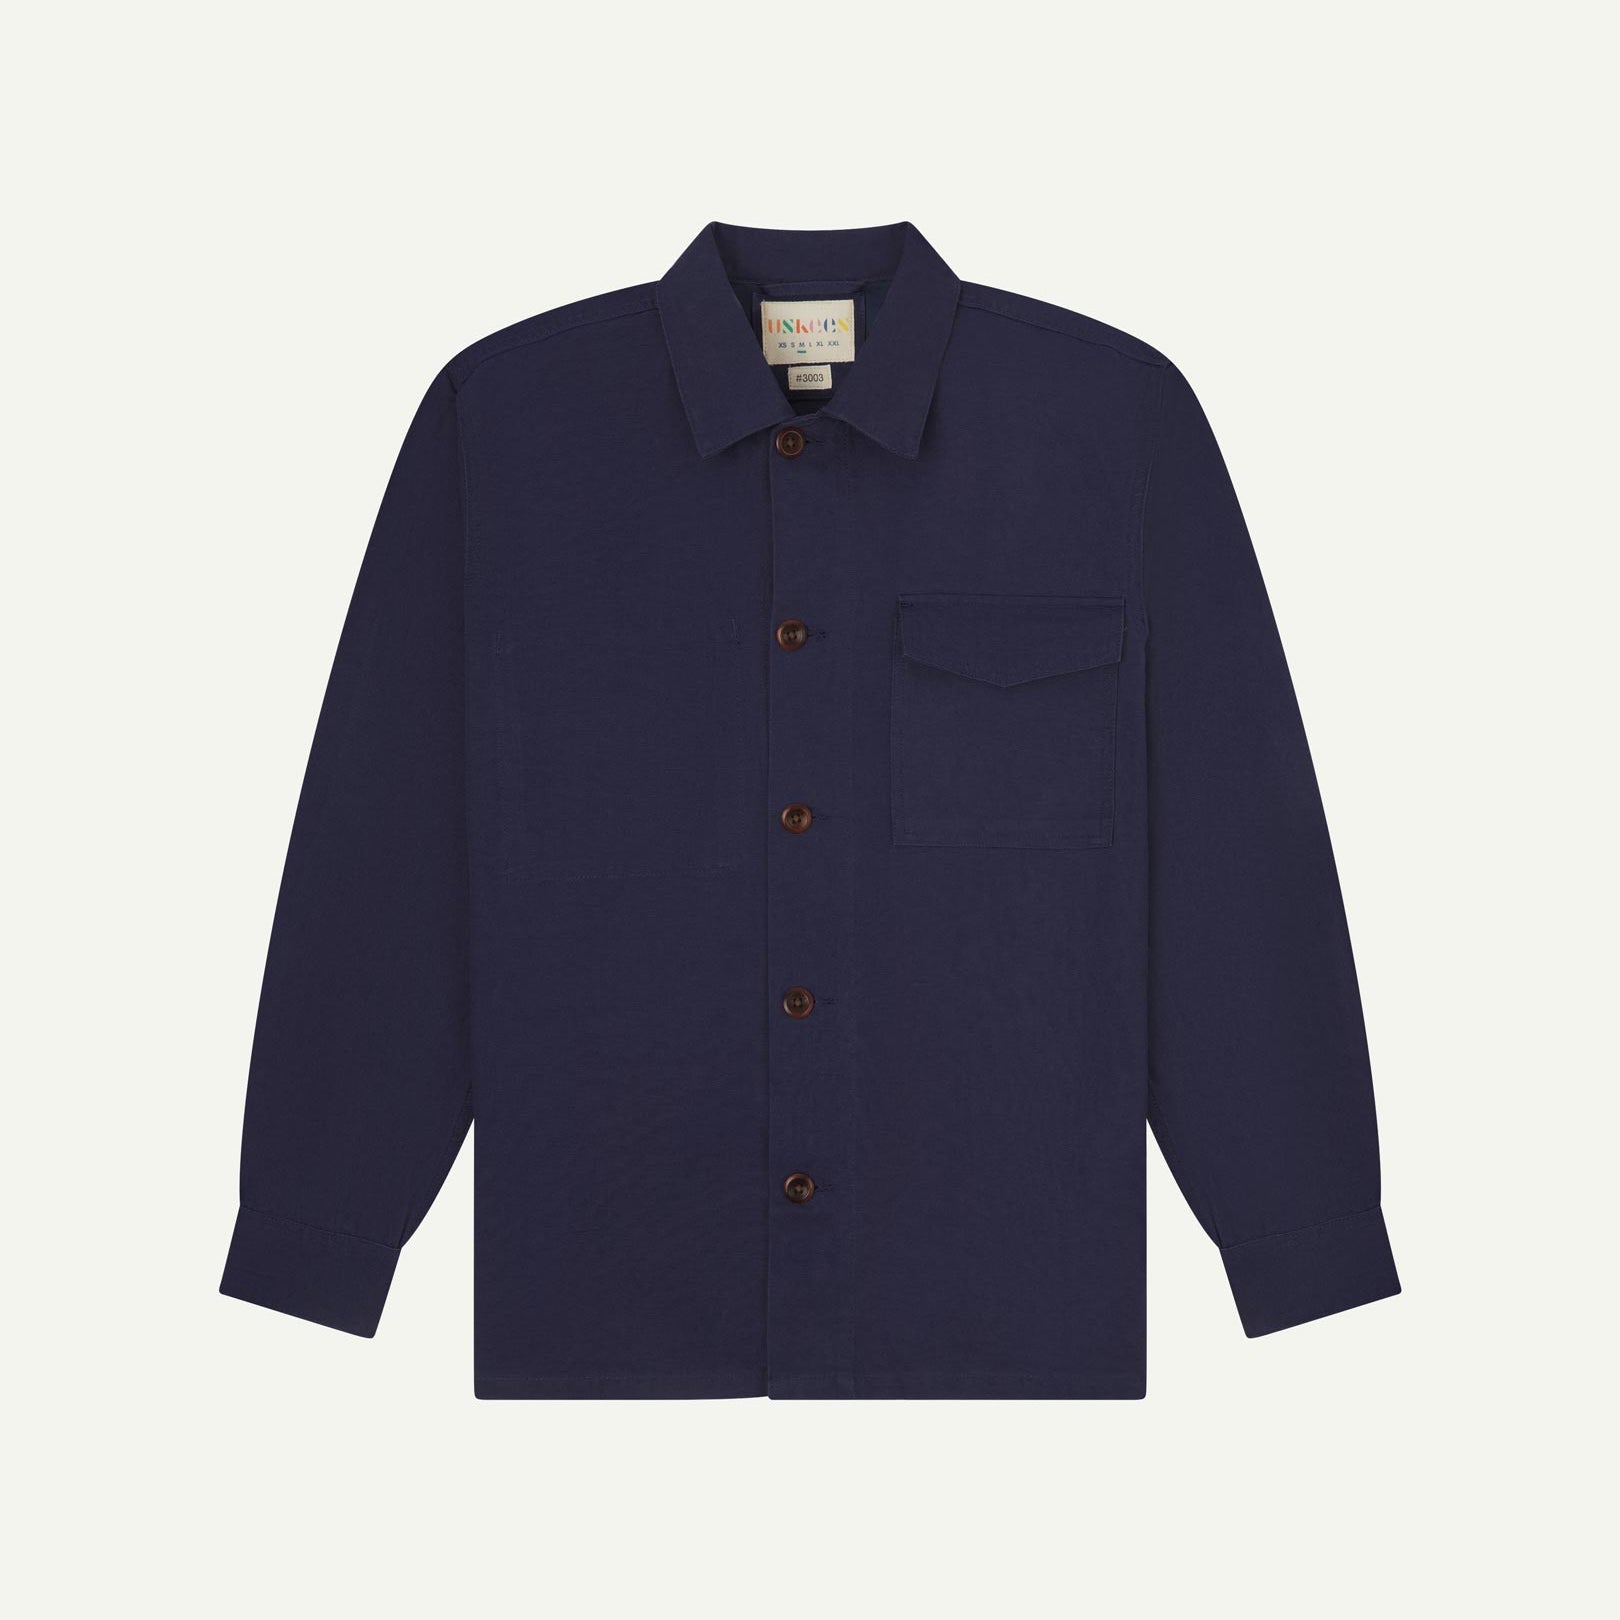 Midnight blue buttoned organic cotton workshirt from Uskees with clear view of chest pocket and Uskees branding label.